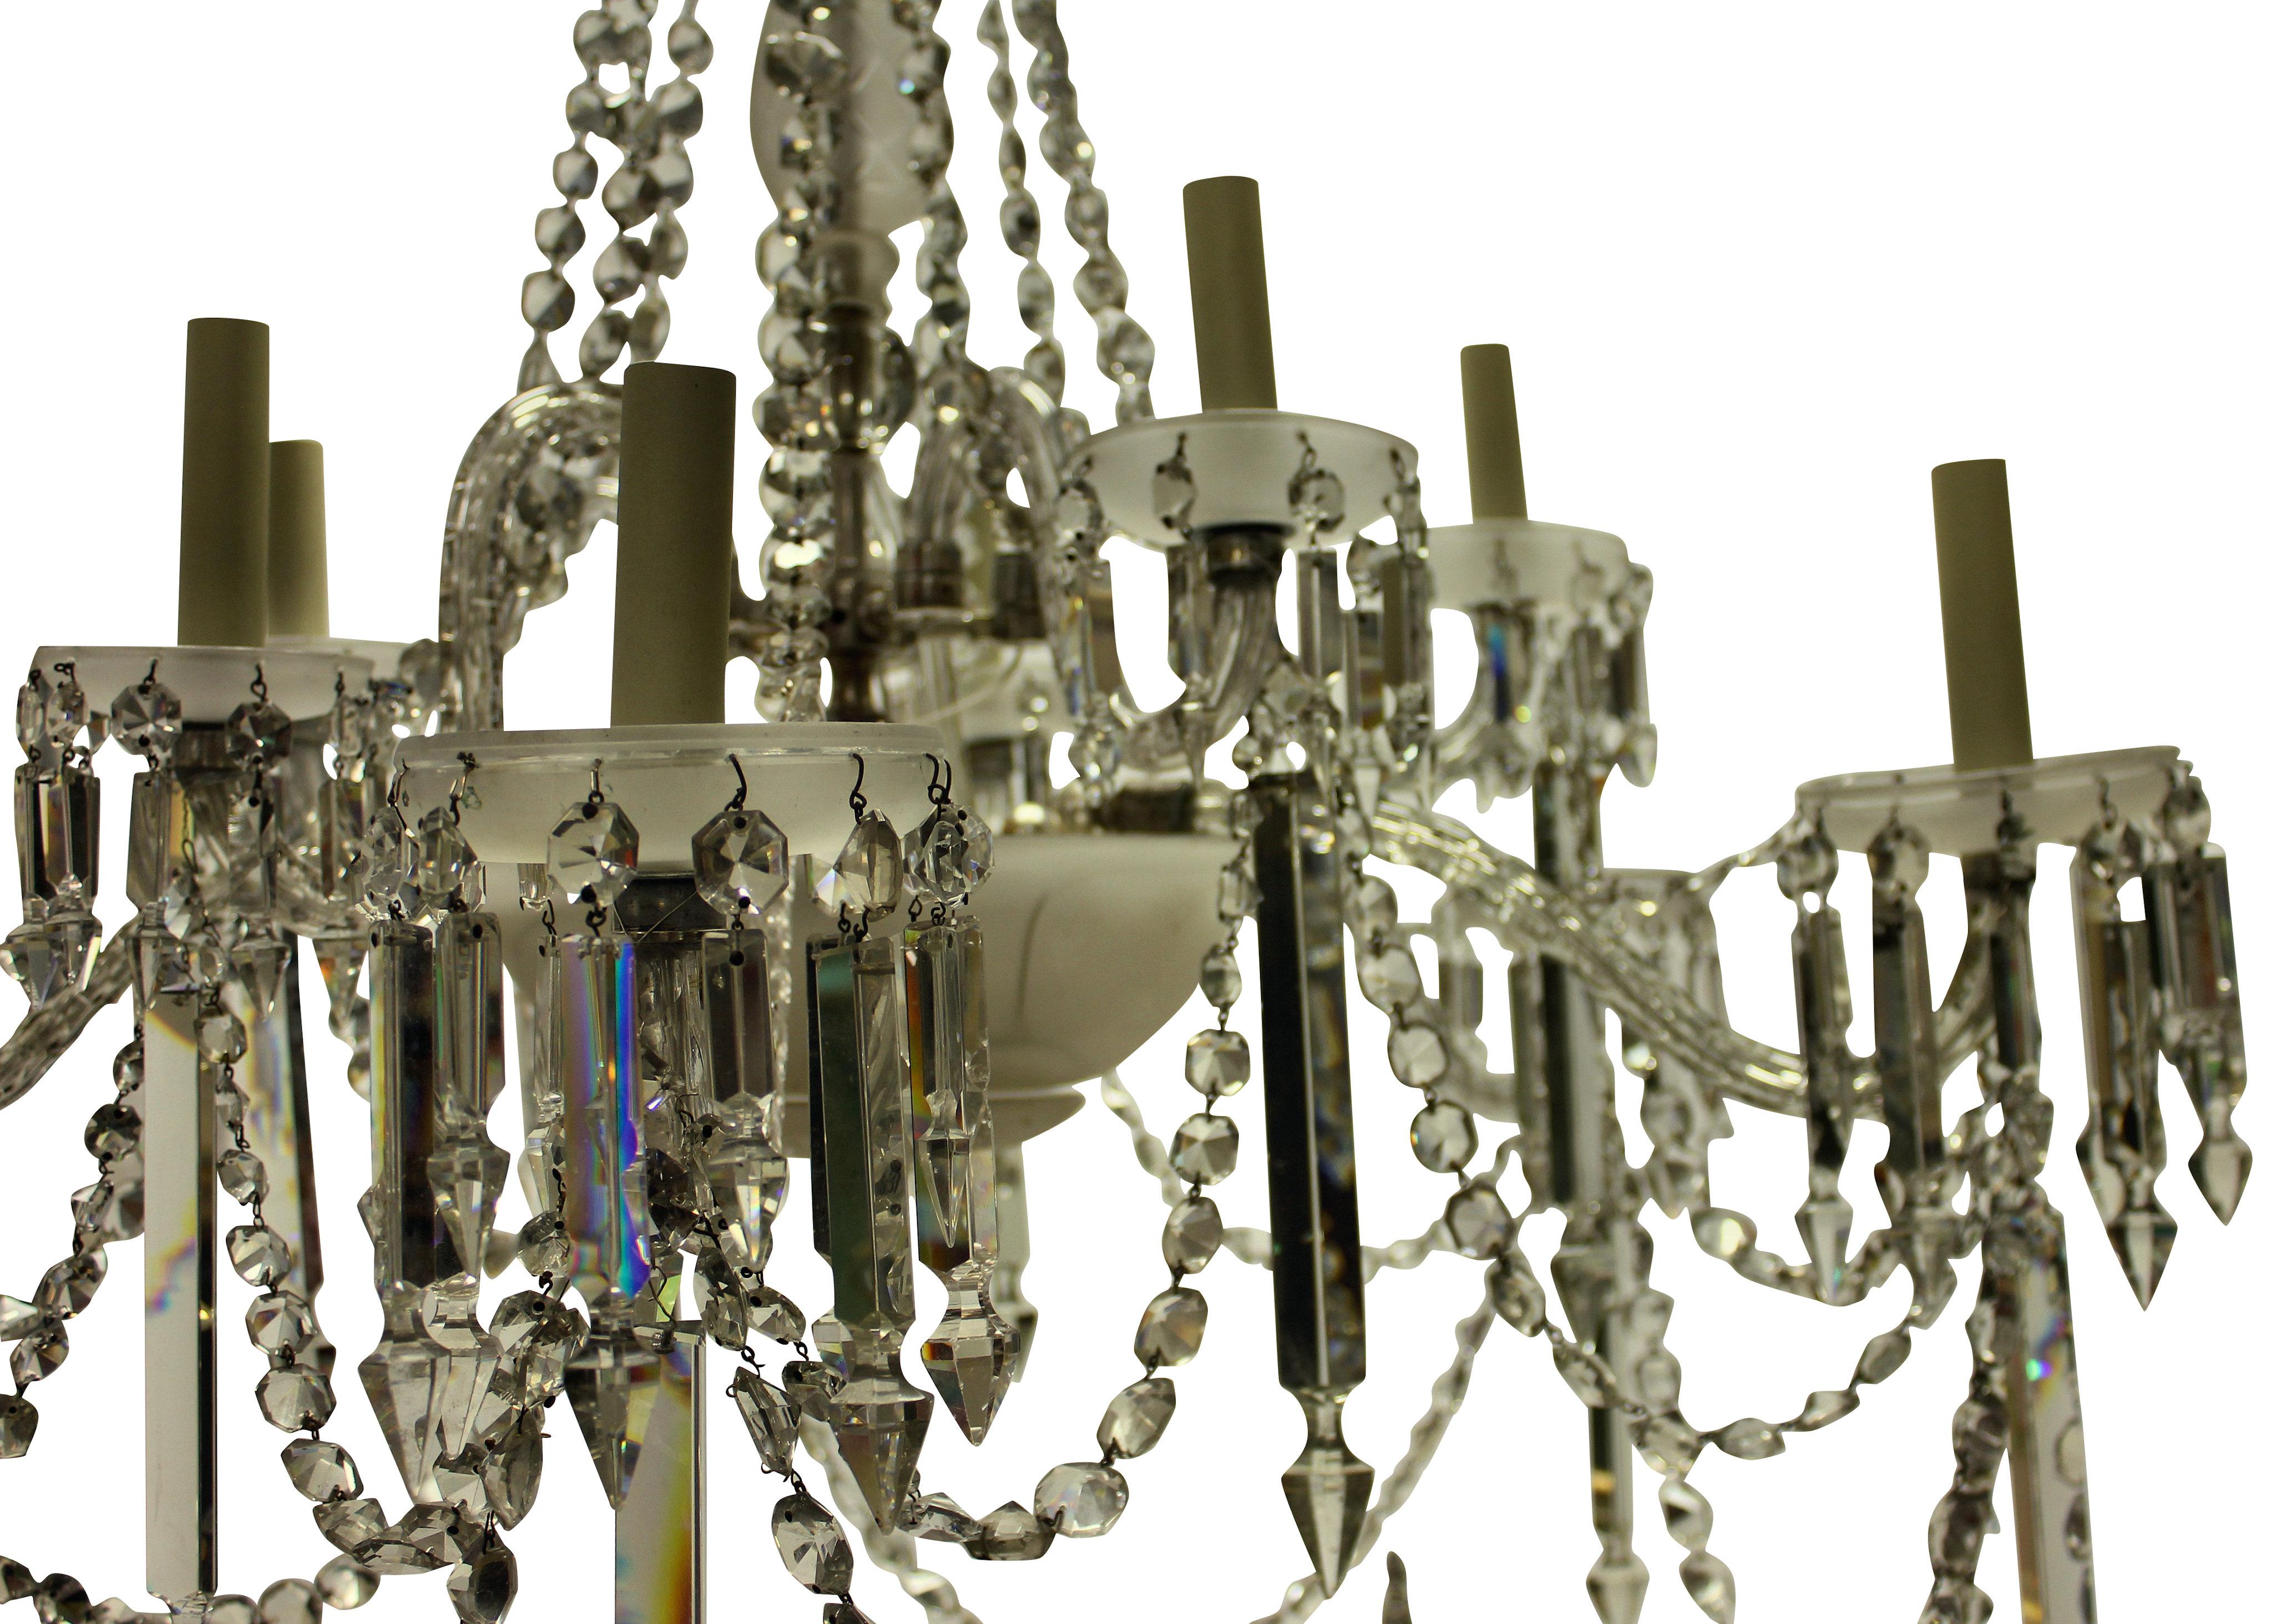 A large English cut and frosted glass Osler chandelier of good quality. Formerly a gasolier, with five up-swept arms and five down-swept arms. The central receiver dish and pans in frosted glass. Hung throughout with prisms and chains.